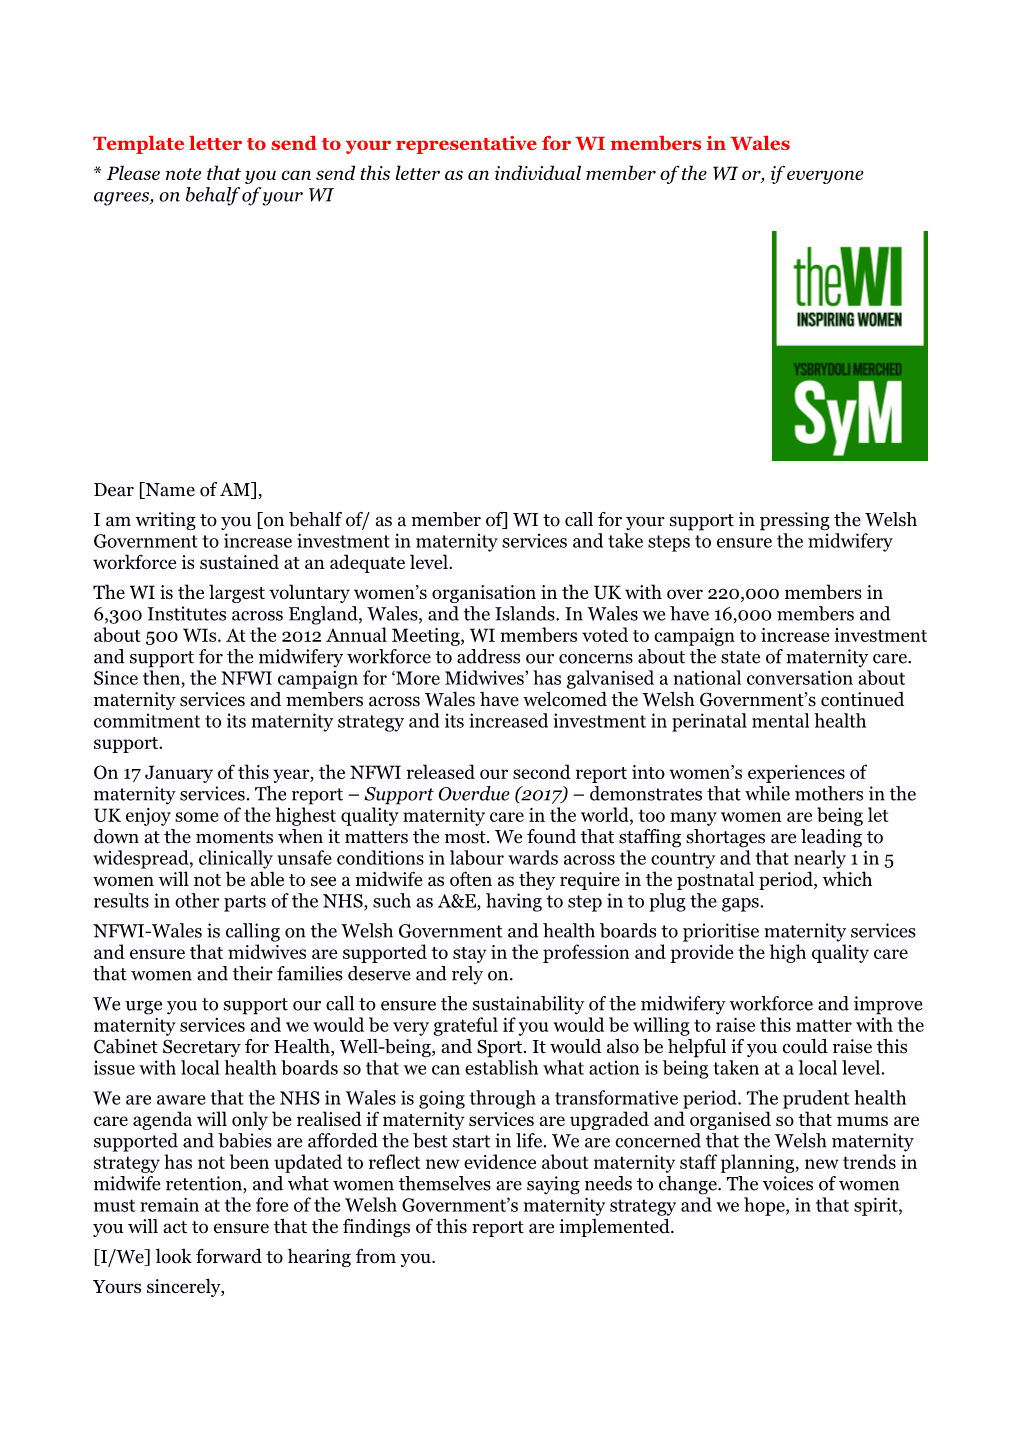 Template Letter to Send to Your Representative for WI Members in Wales